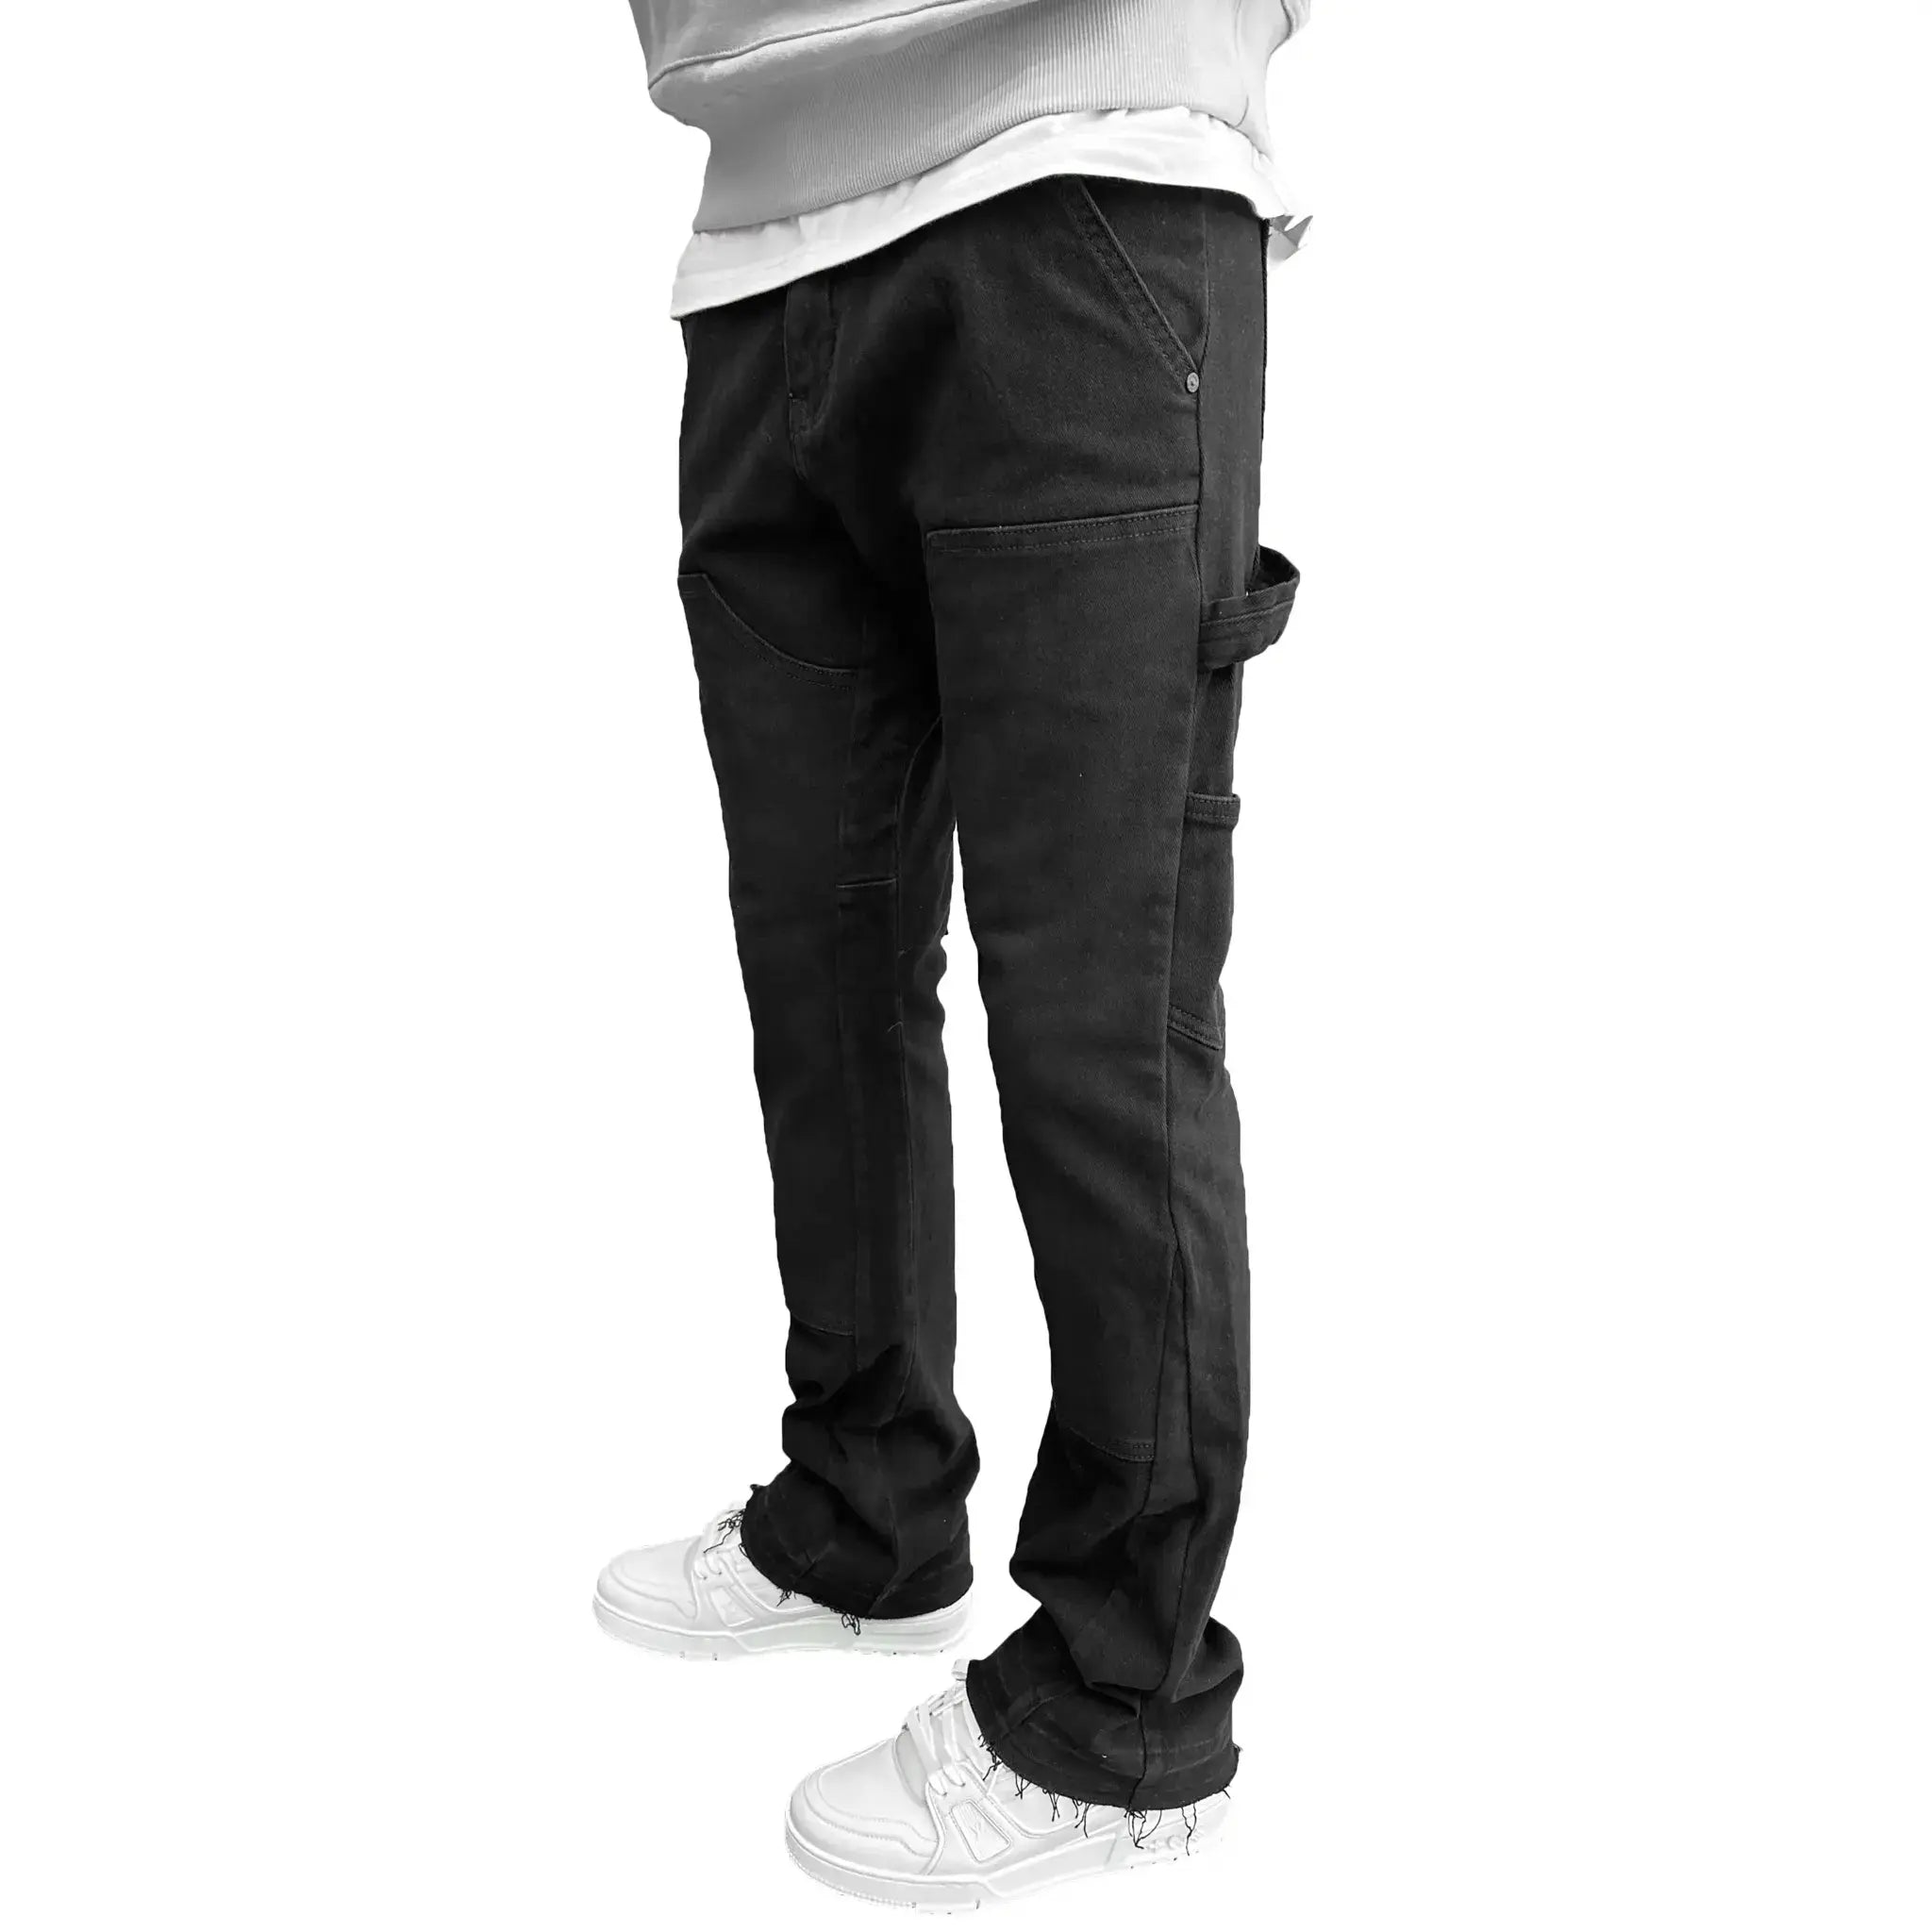 Model side view of SIARR Rio Jeans Black